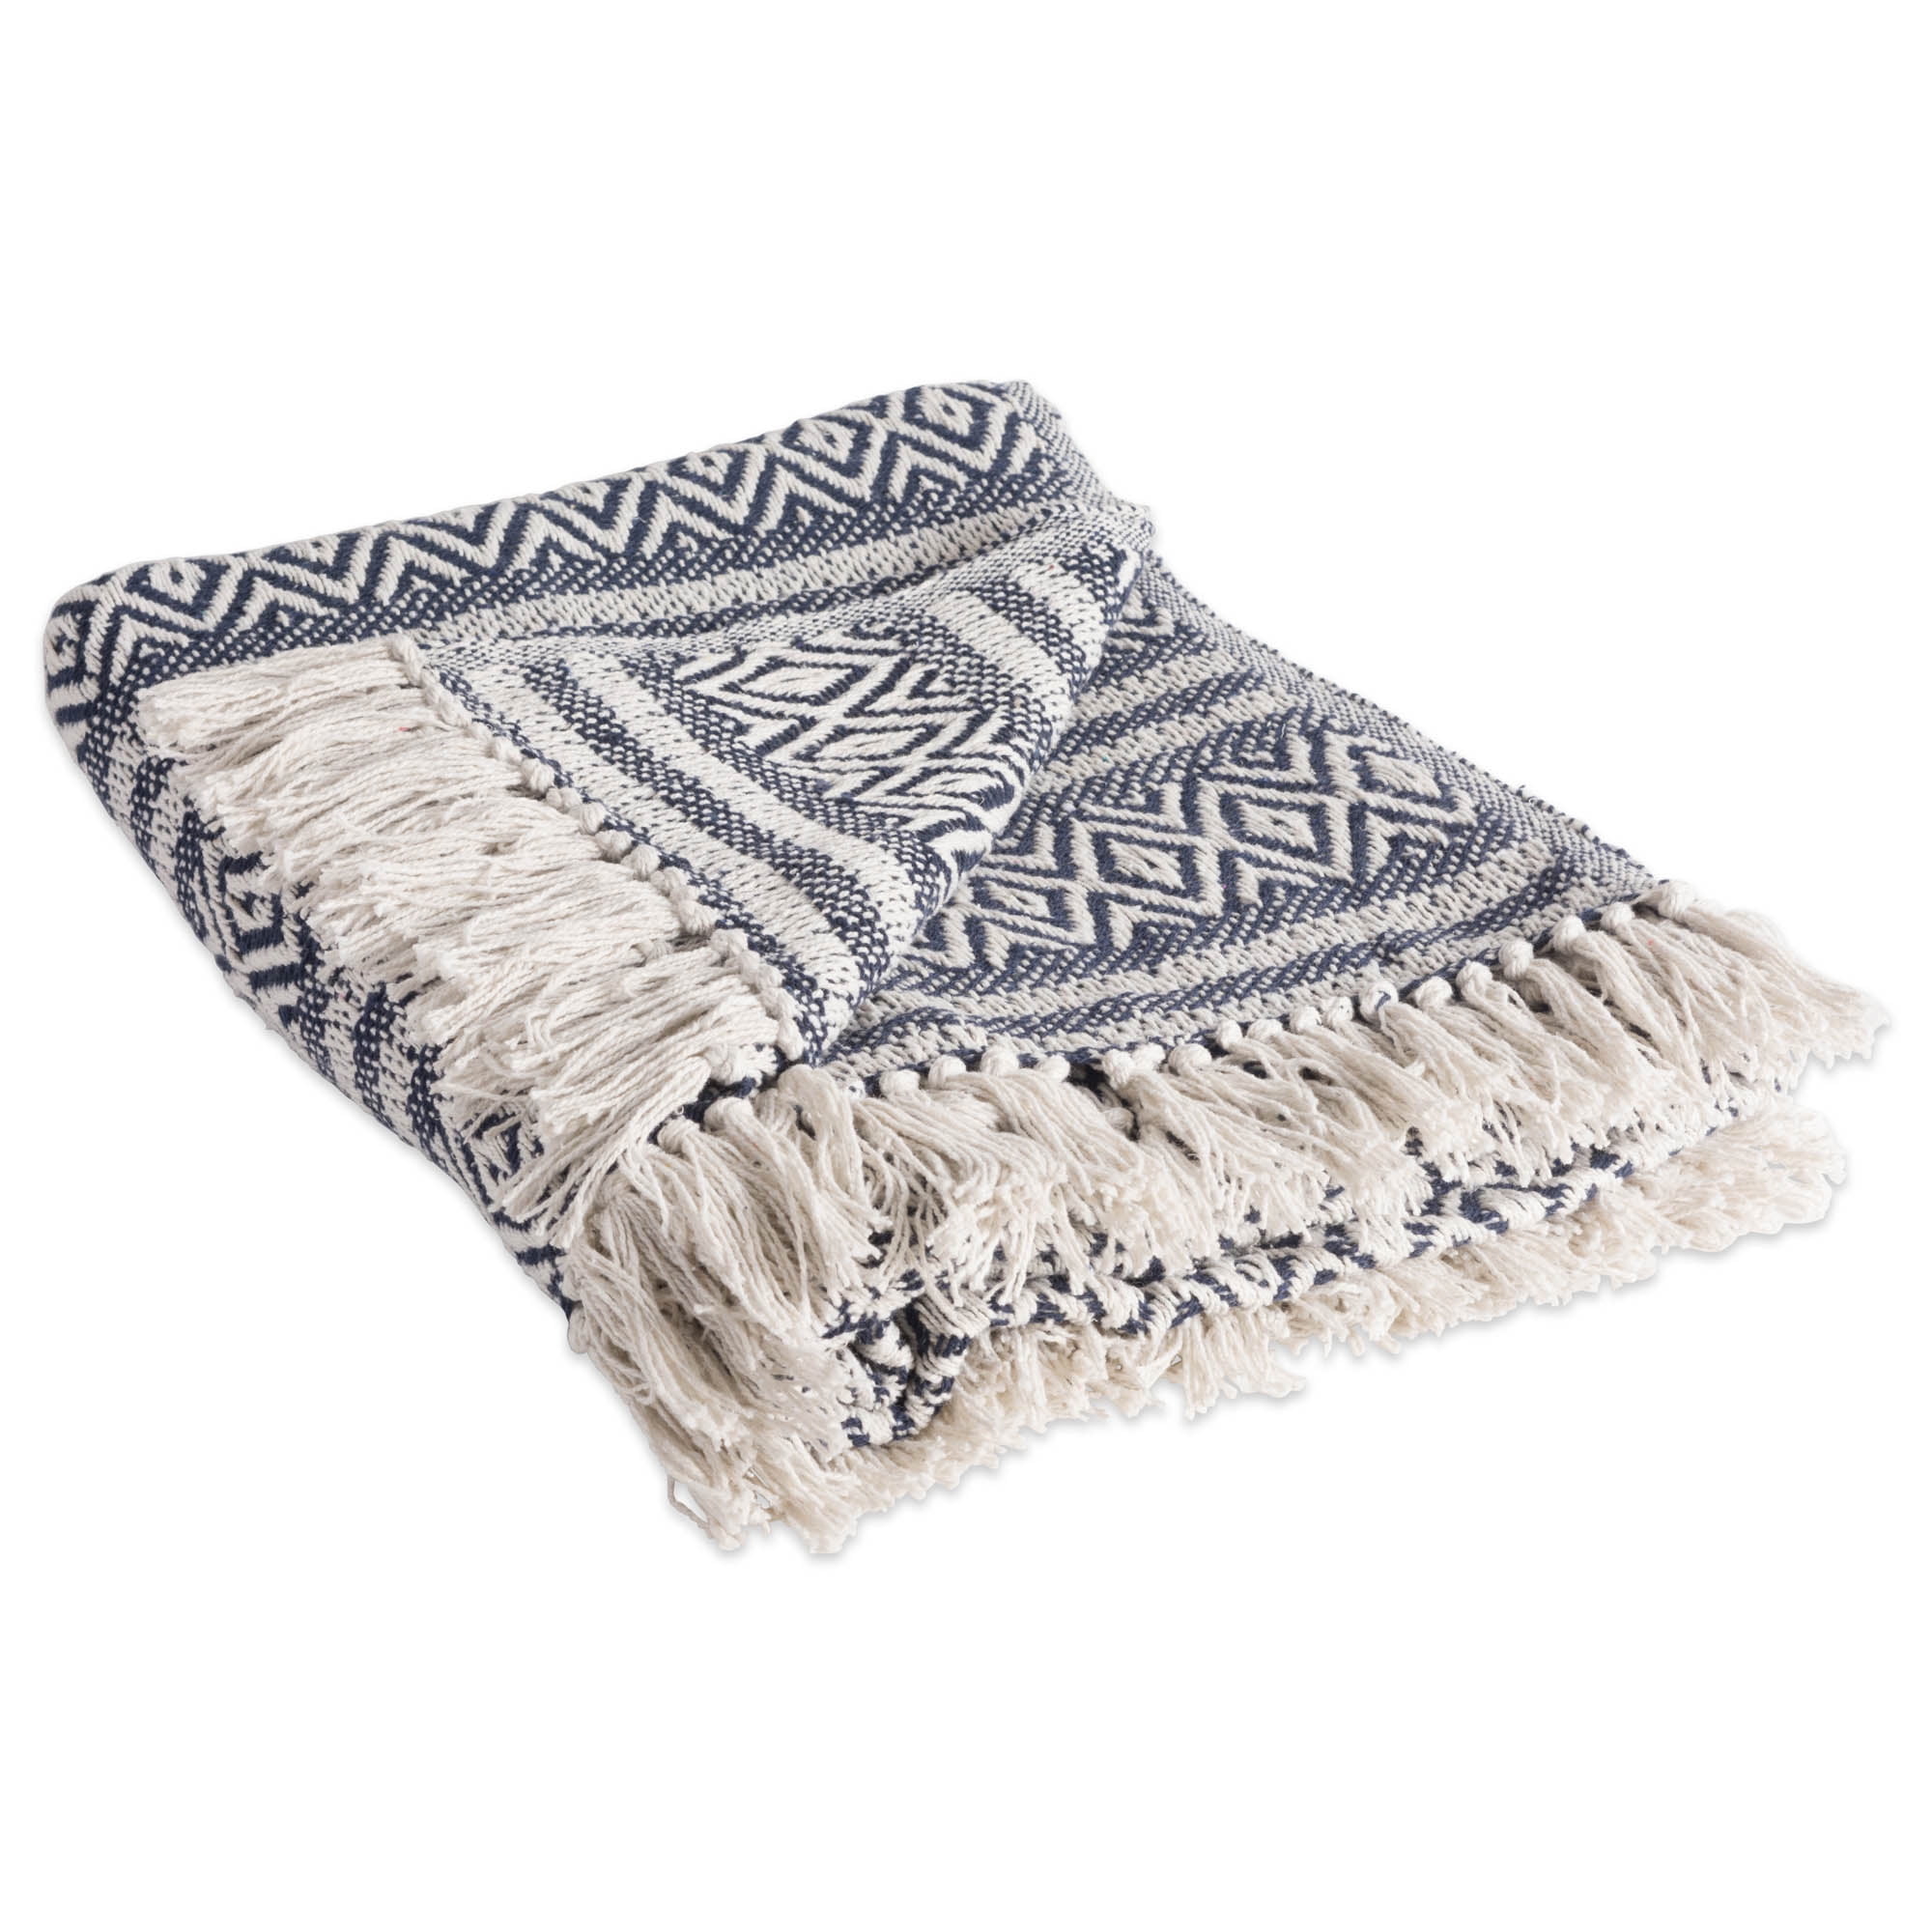 Details about   DII Rustic Farmhouse Cotton Chevron Blanket Throw with Fringe For Chair Couch, 